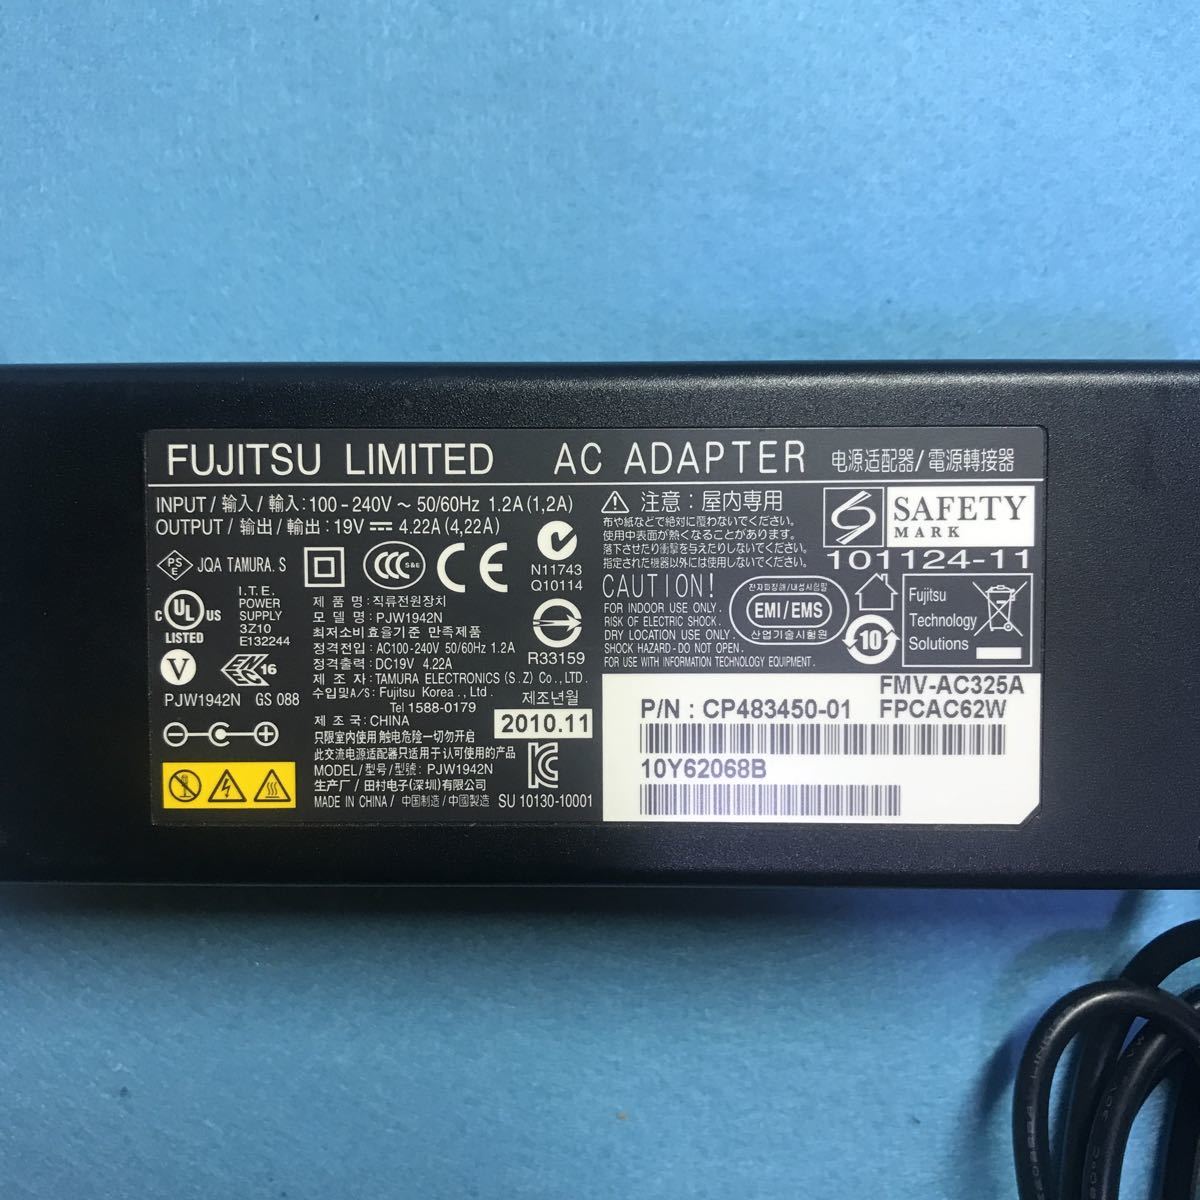  Fujitsu AC adapter FMV-AC325A( vertical width label ..) (19V 4.22A ) 7 days guarantee anonymity delivery postage included 